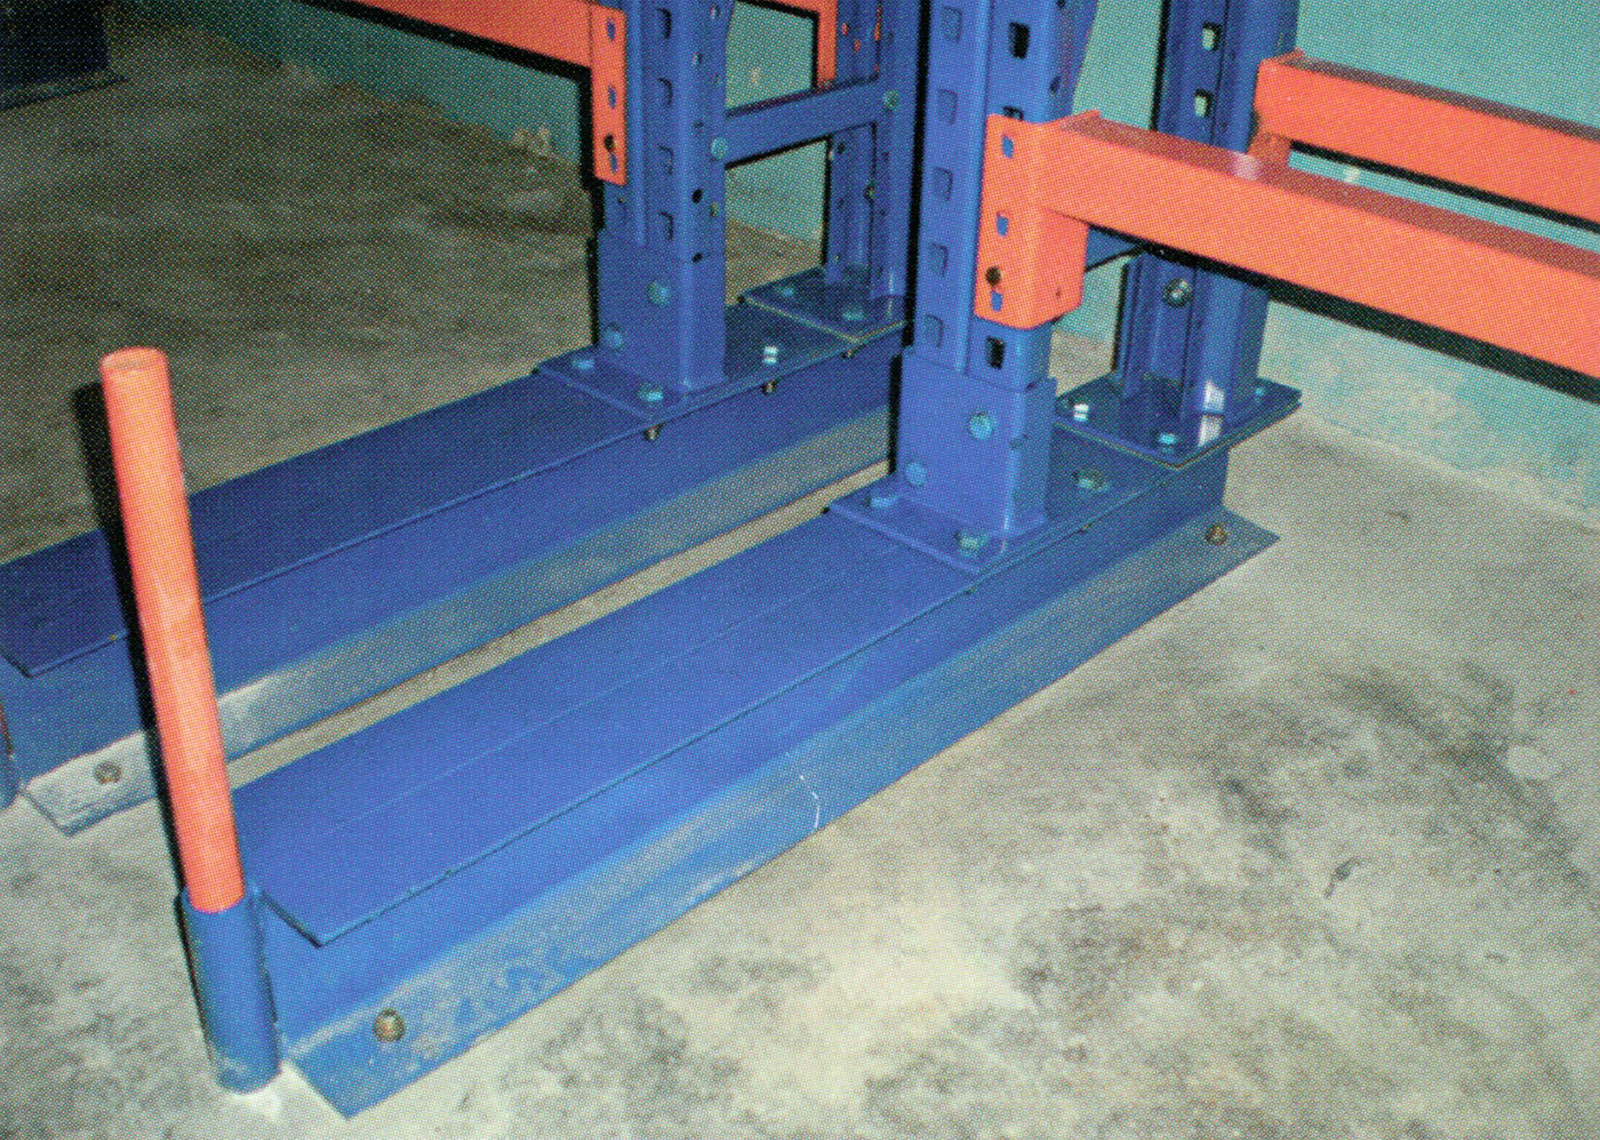 Extended Base and Braces will re-enforce these racks stability & rigidity